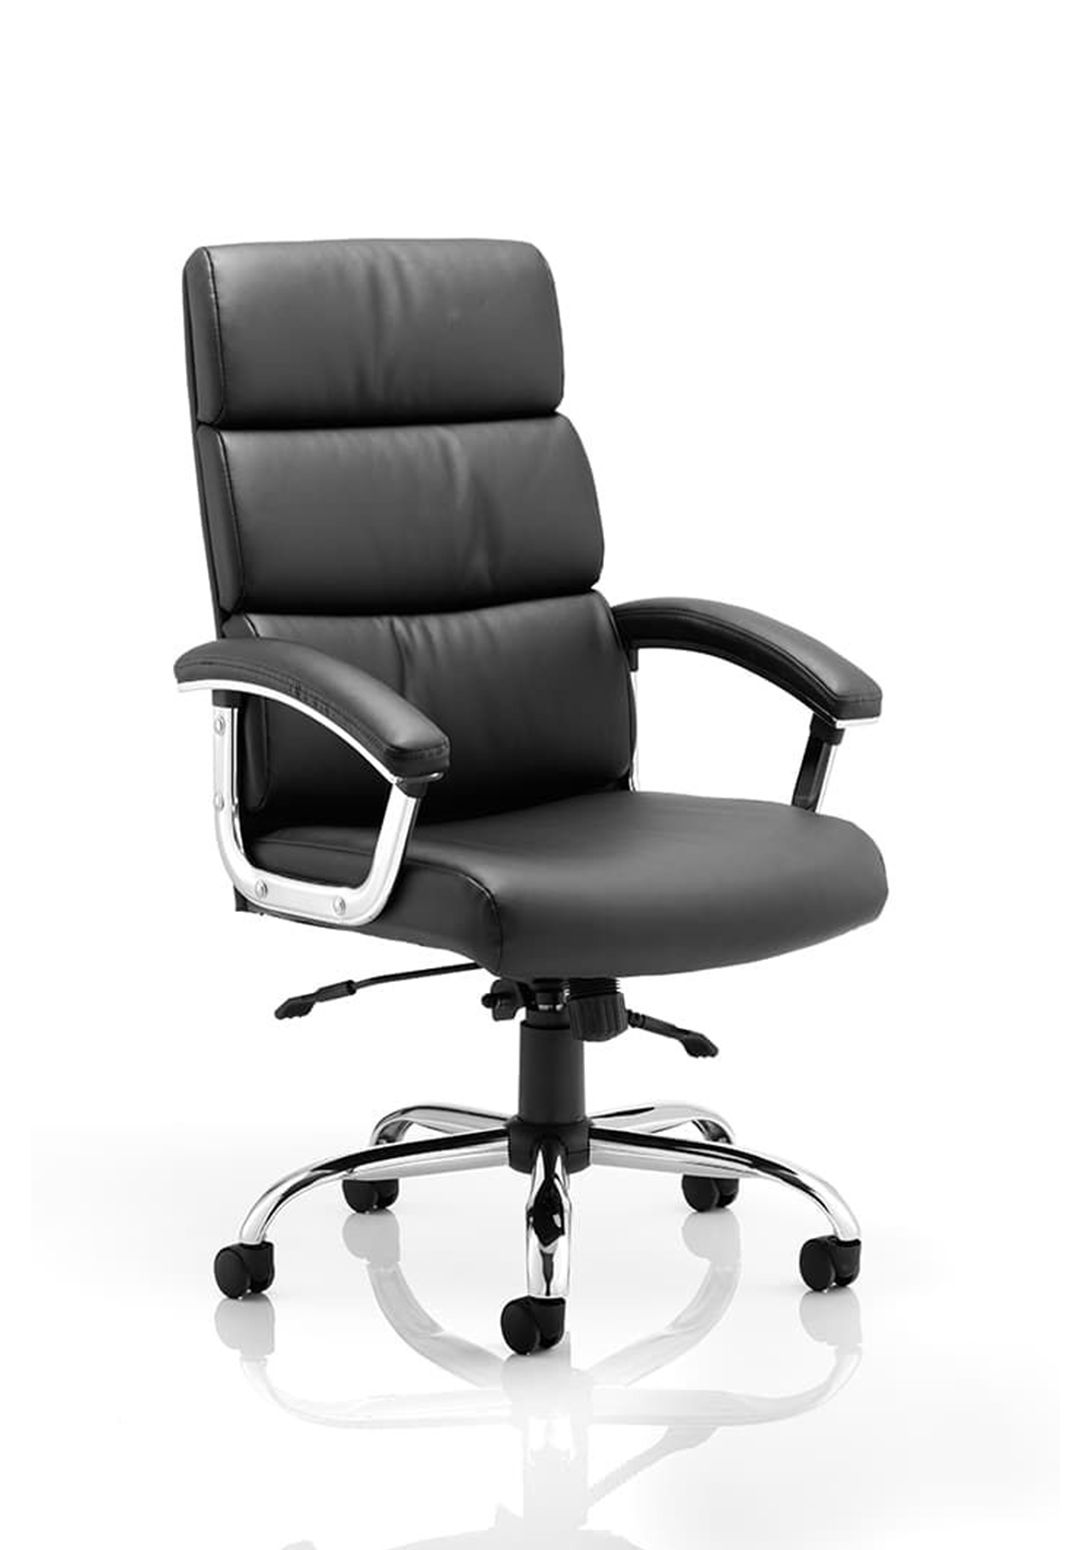 Desire Exec Home Office Chair | Executive Chair | Home Office Furniture | Padded Soft Chair | Leather Executive Chair | Leather Home Office Chair | Swivel Office Chair